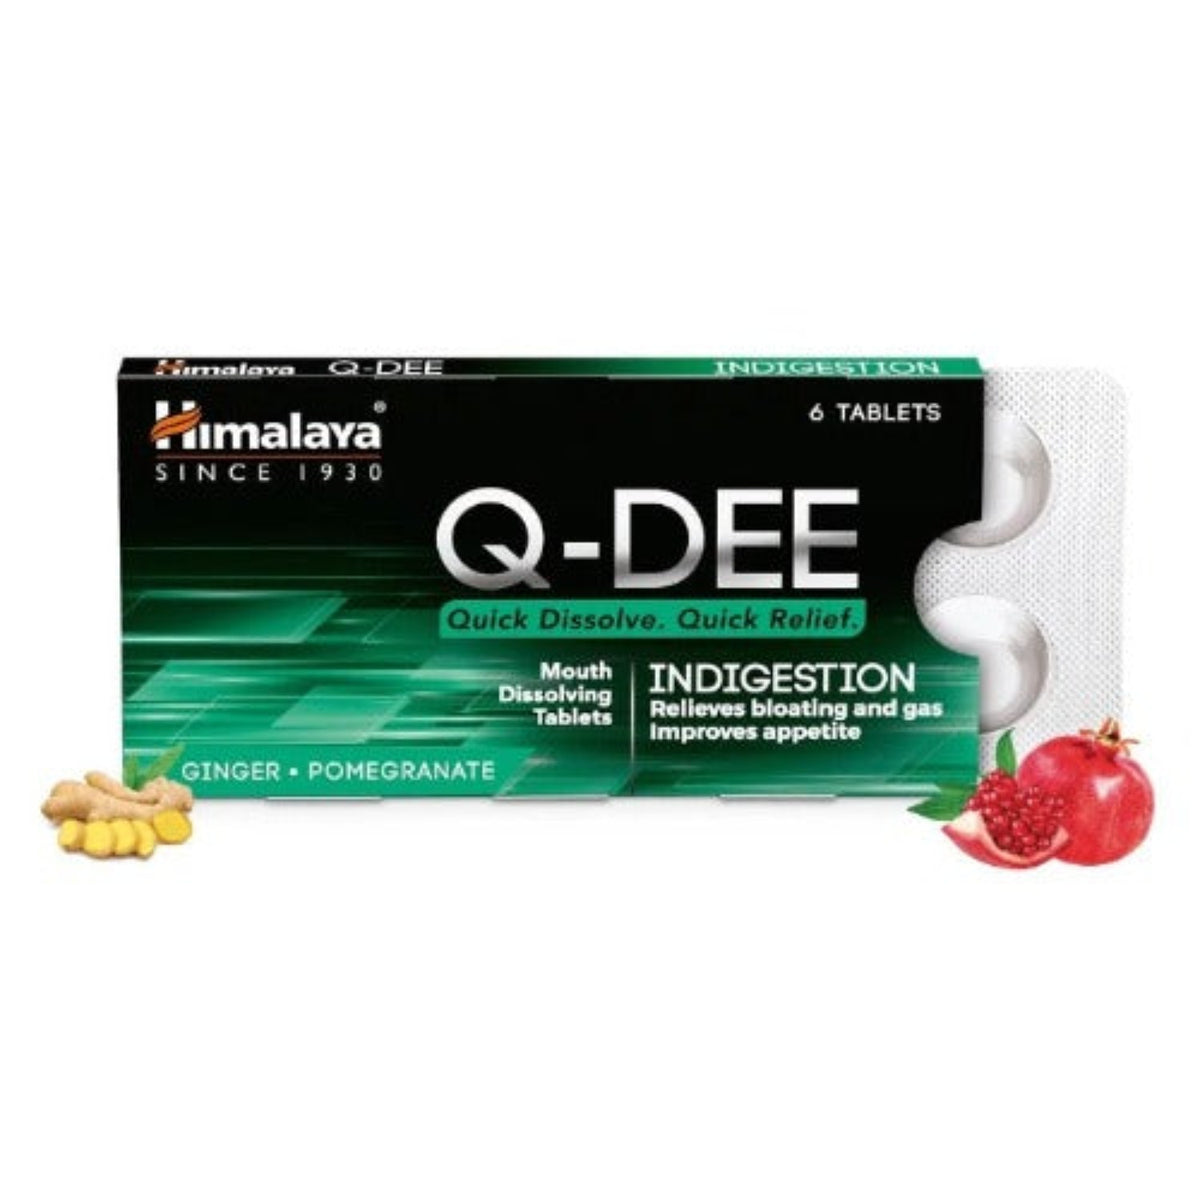 Himalaya Herbal Ayurvedic Q-DEE Indigestion Quick Dissolve, Quick Relief Relieves Symptoms Of Indigestion On-The-Go 6 Tablets